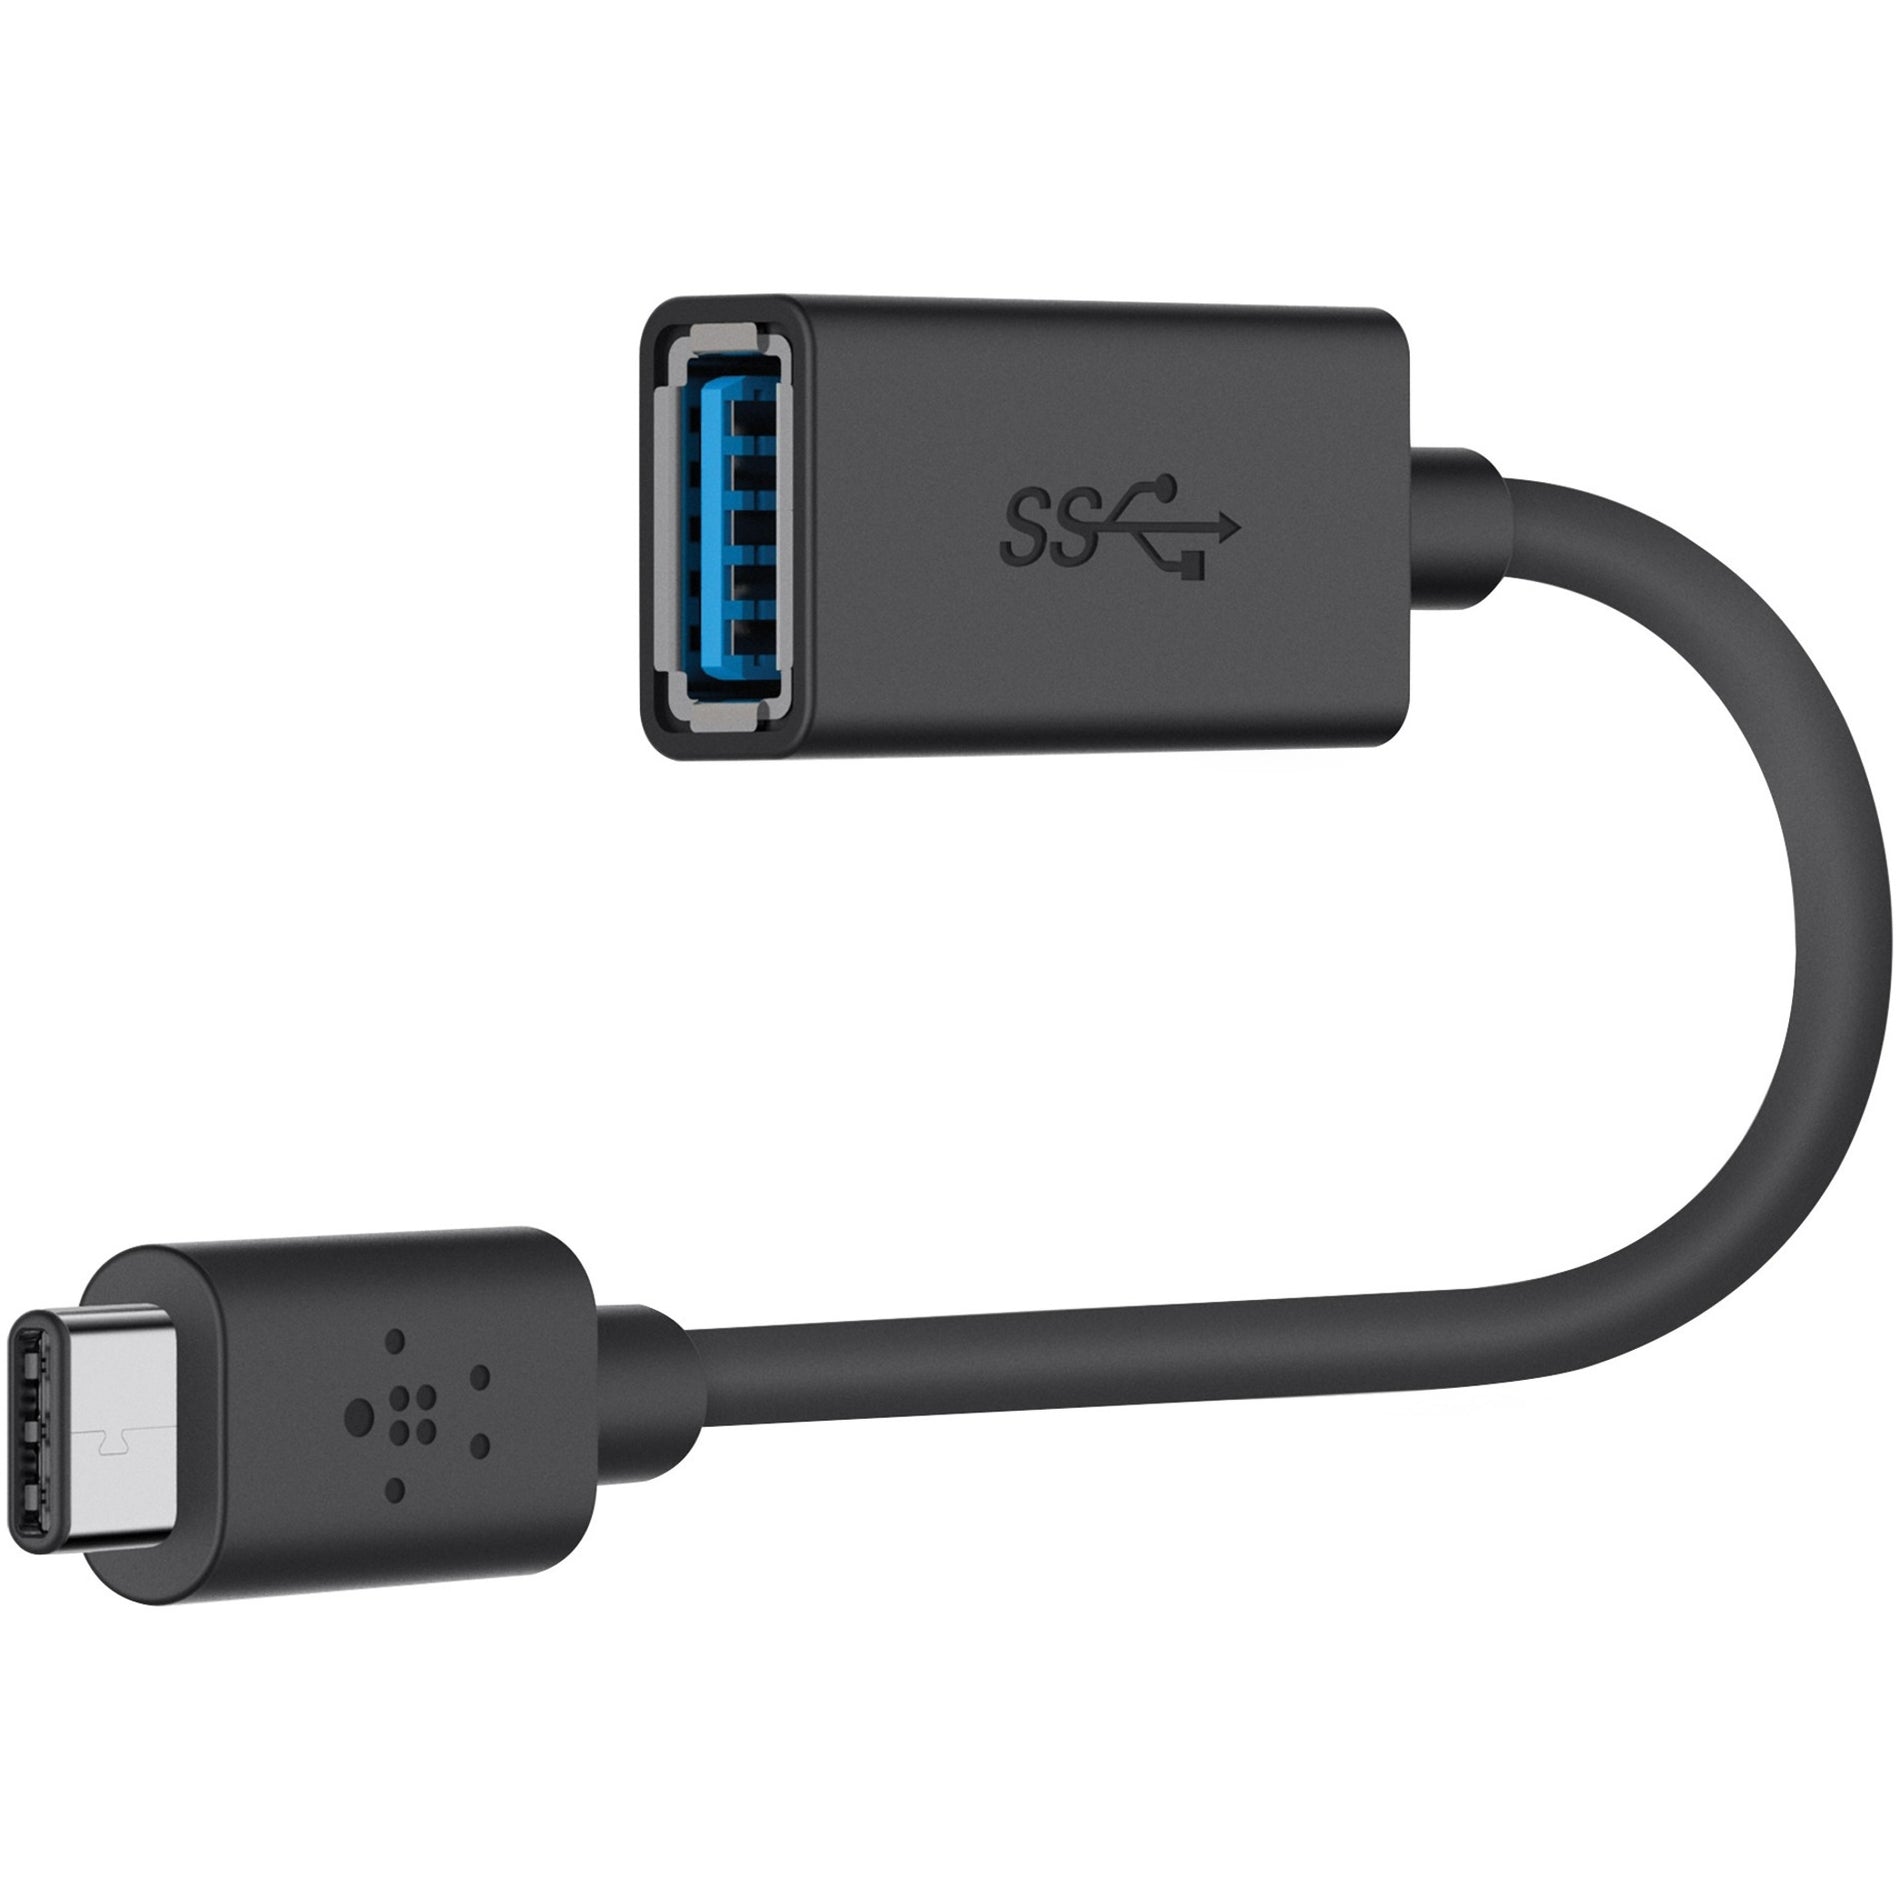 Belkin F2CU036BTBLK 3.0 USB-C to USB-A Adapter, Reversible Charging, 5" Cable Length